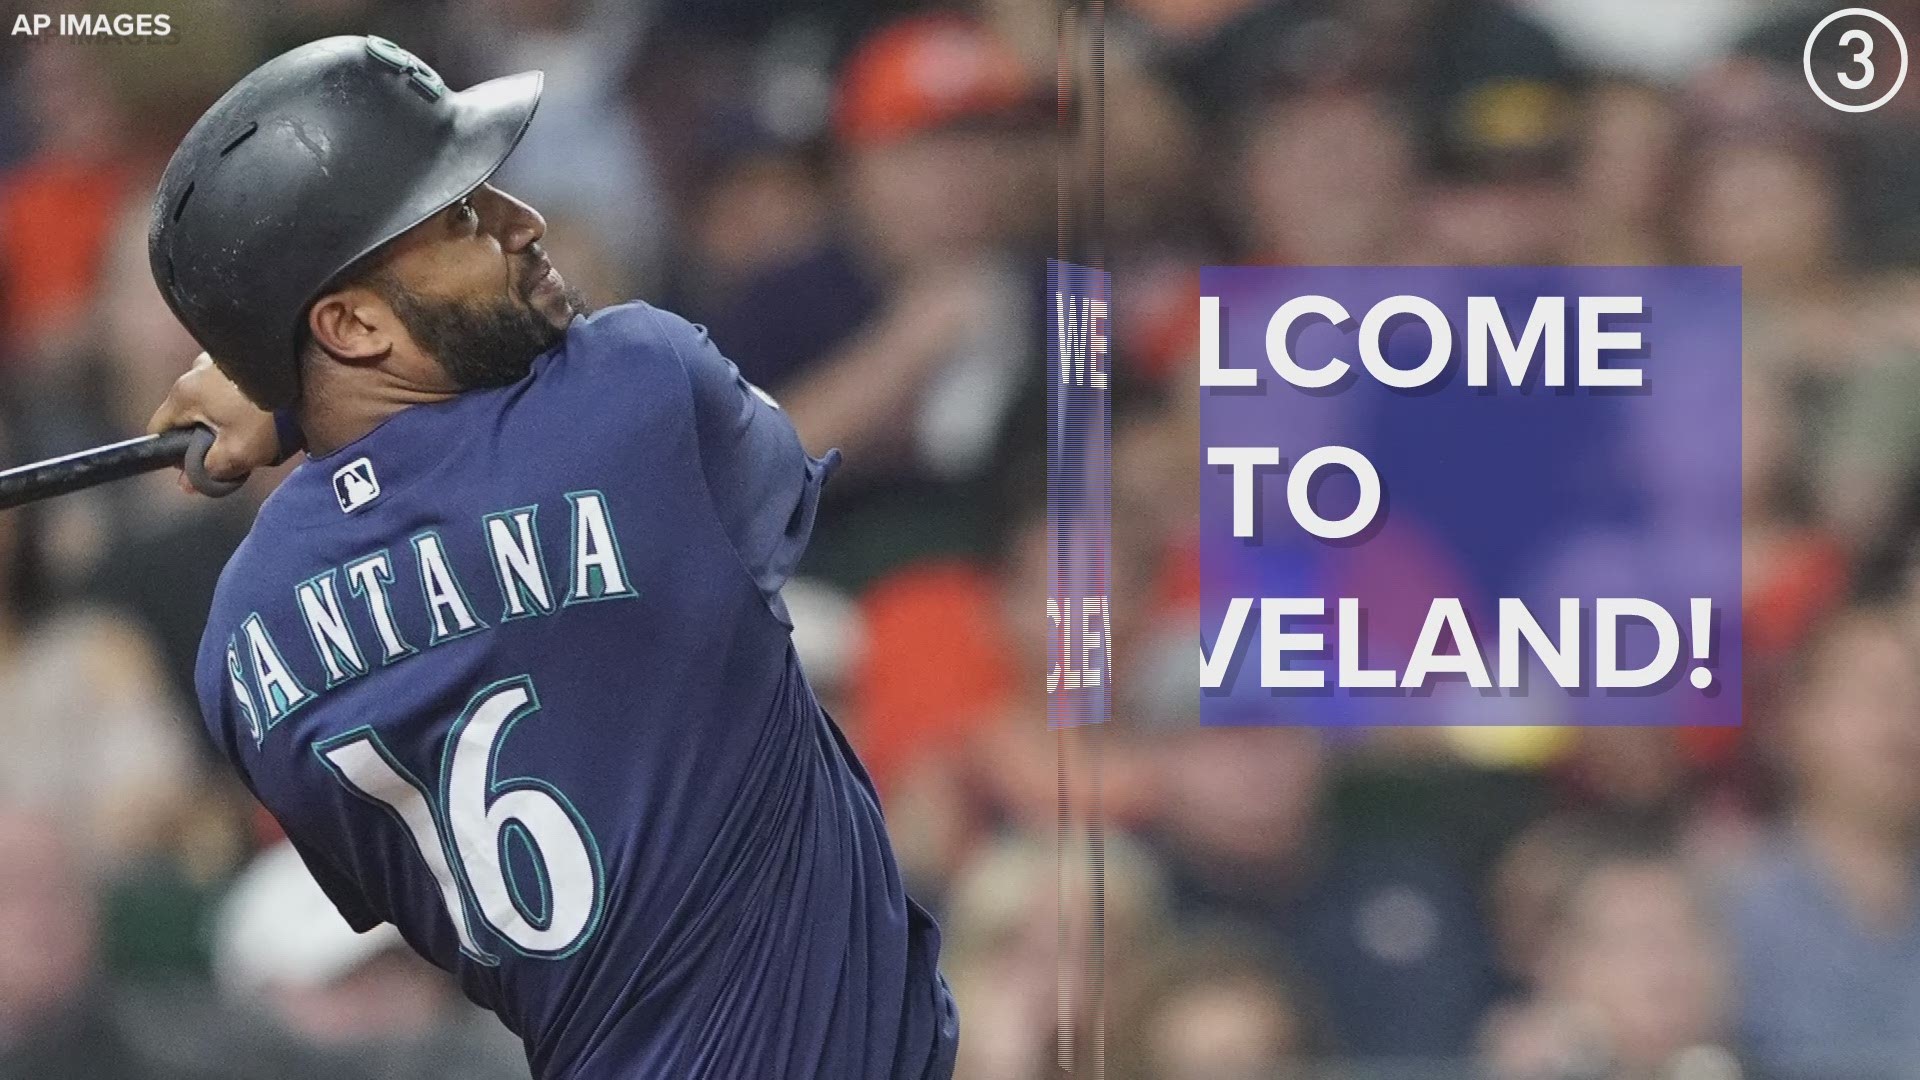 Welcome to Cleveland!  The Indians announced on Friday that they've signed outfielder Domingo Santana to a one-year contract, with a club option for a second year.